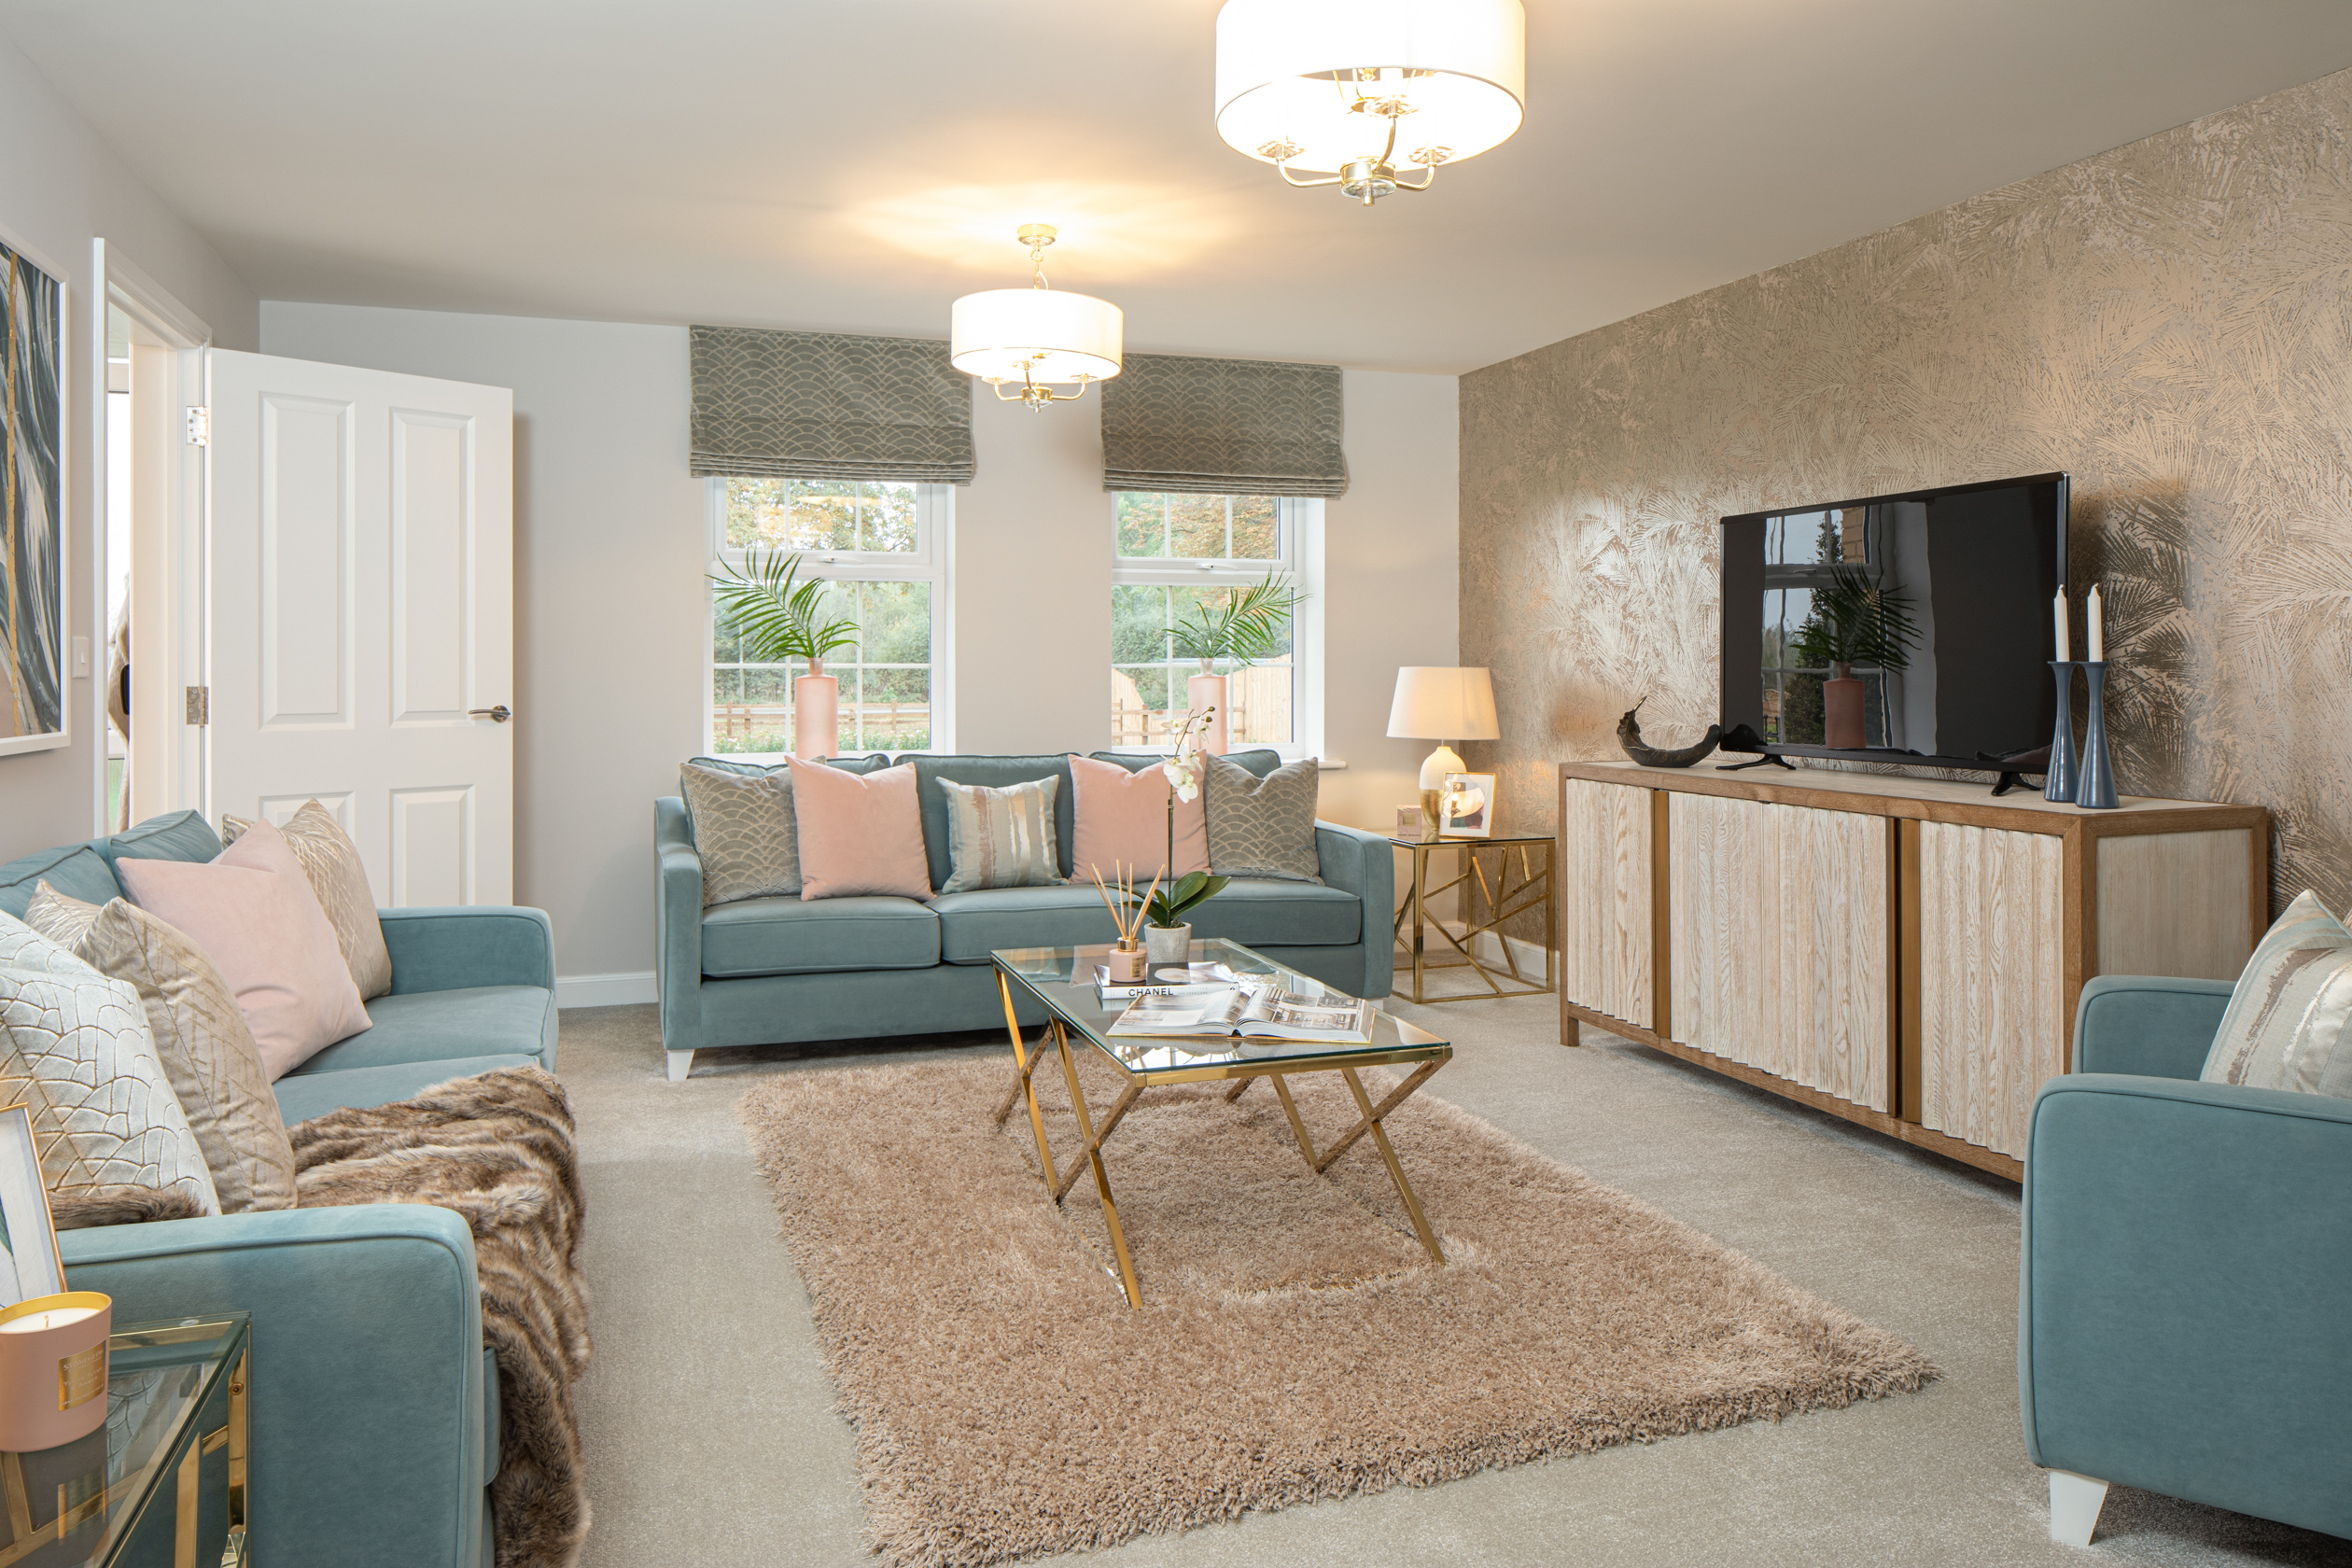 Property 2 of 9. 4 Bedroom Show Home At Kings Gate In Abingdon